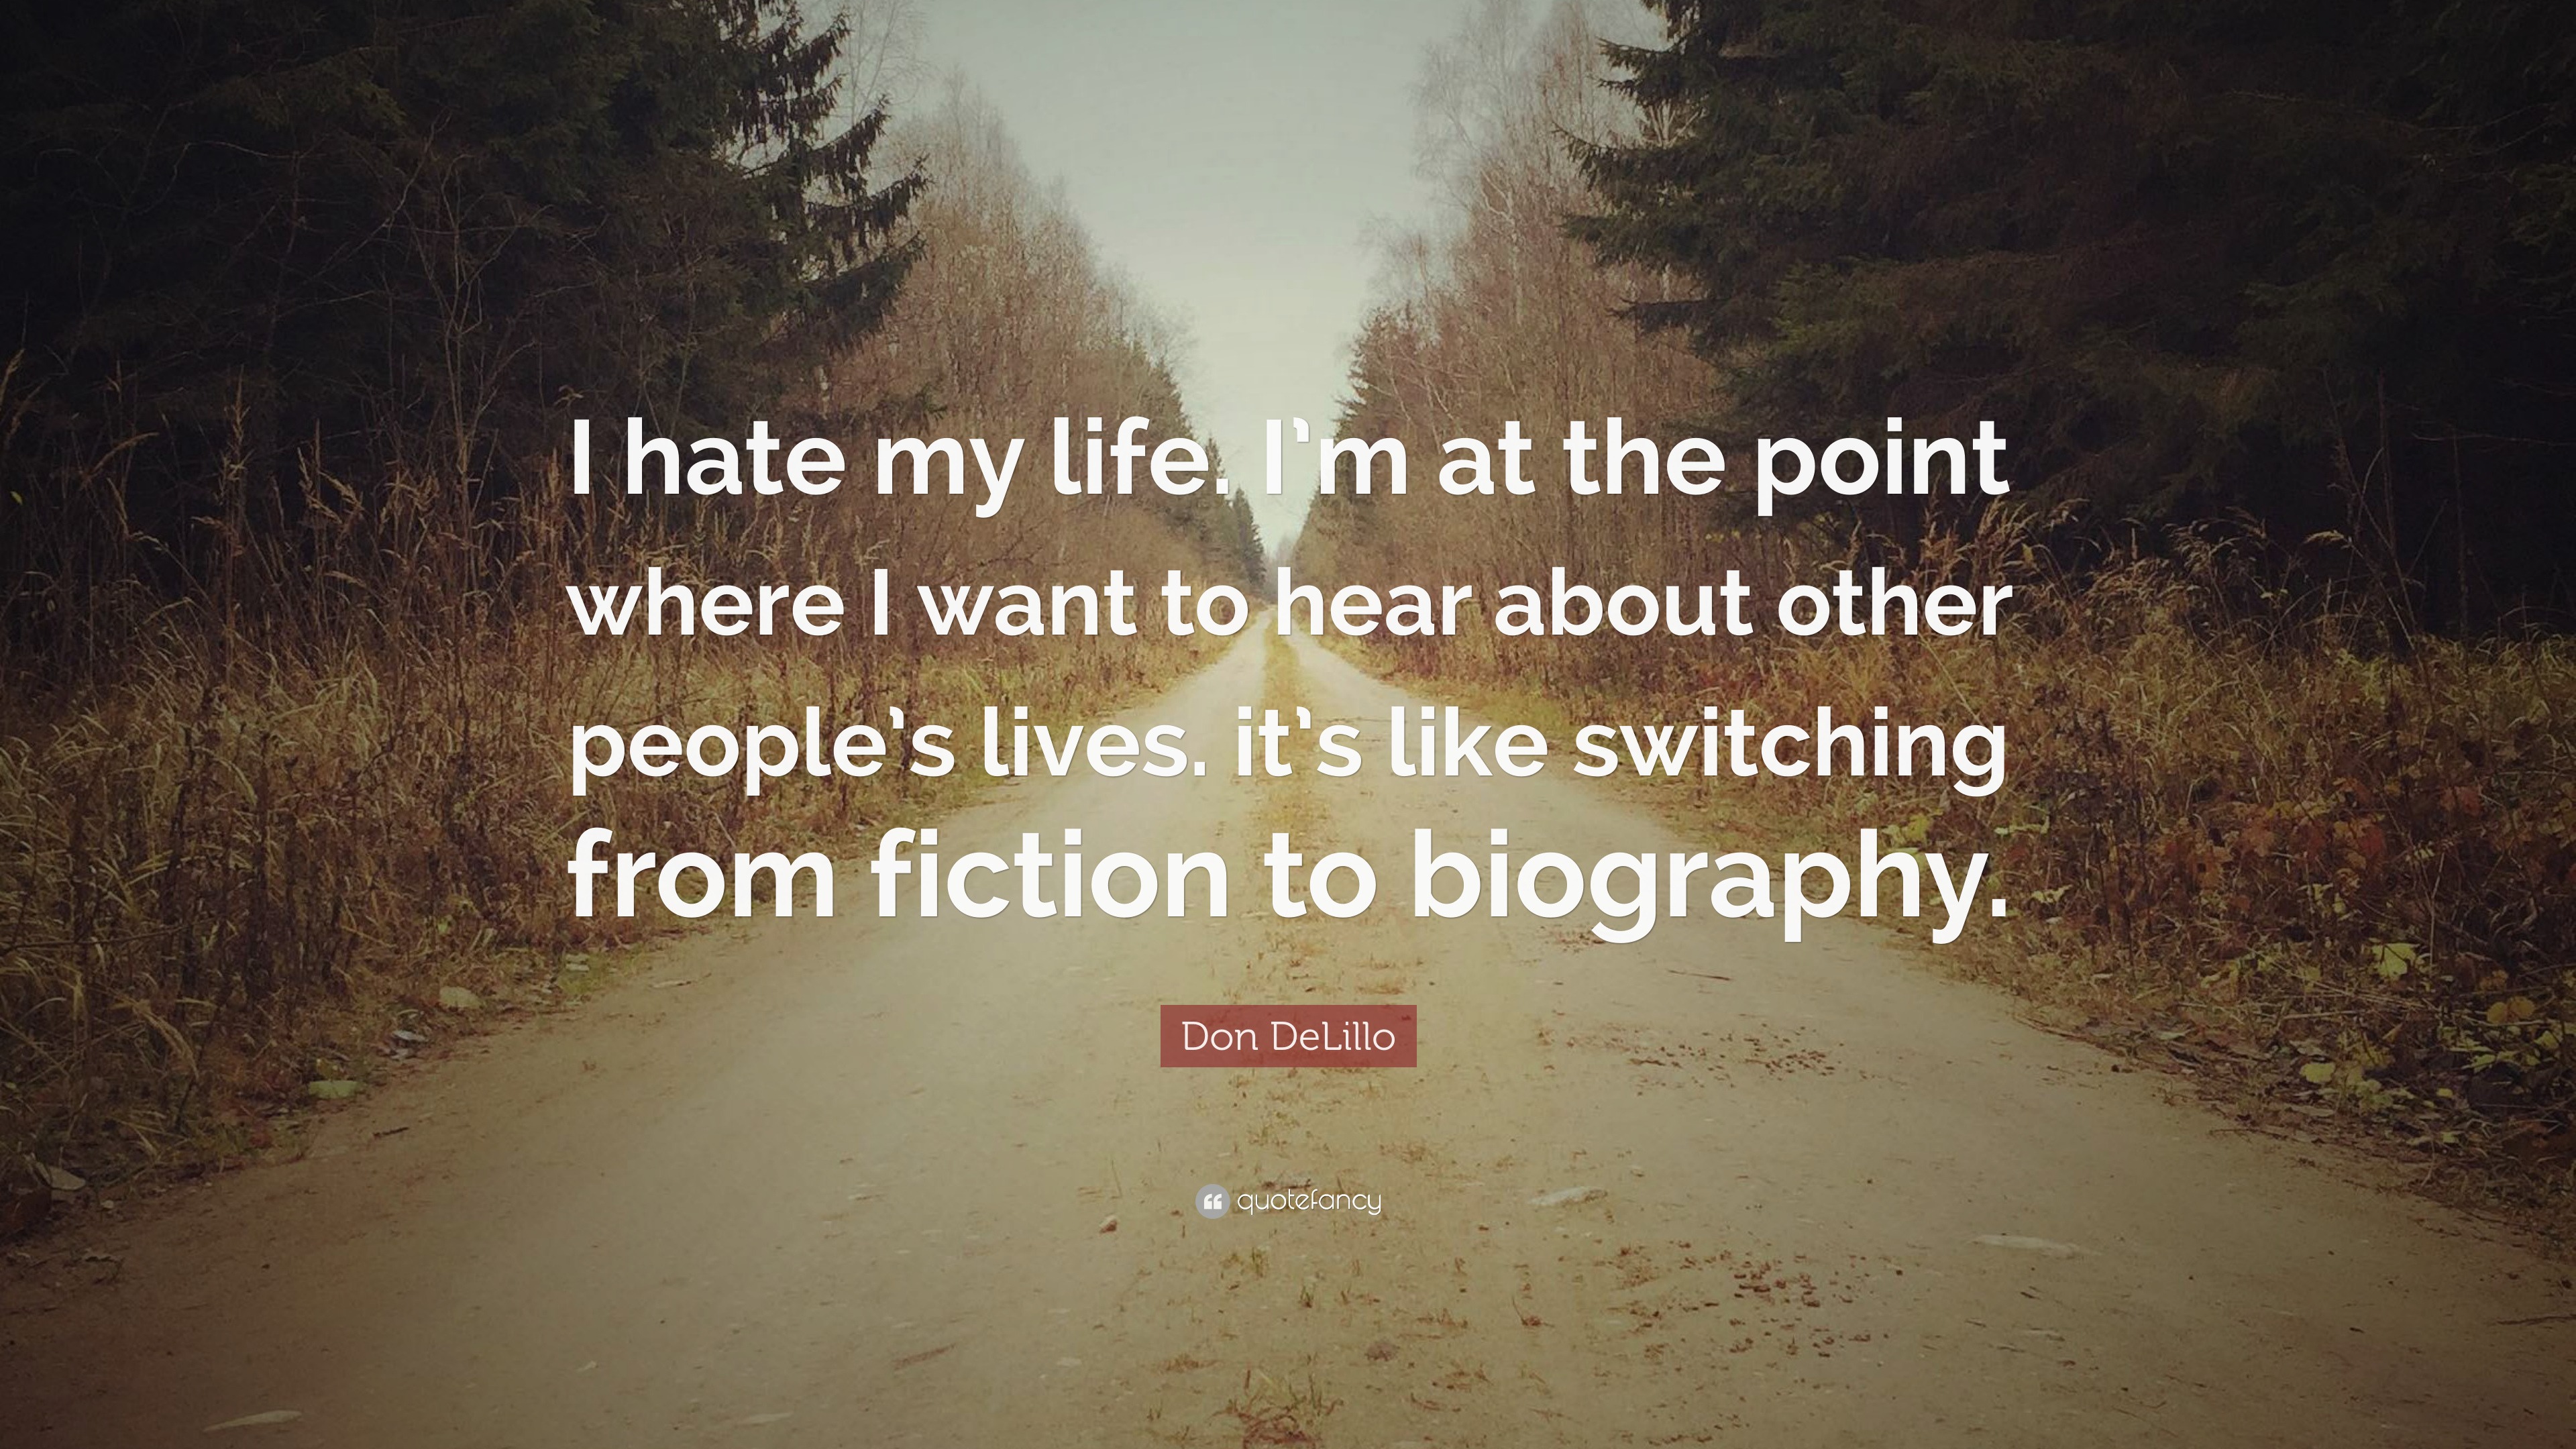 Don DeLillo Quote: “I hate my life. I’m at the point where I want to ...